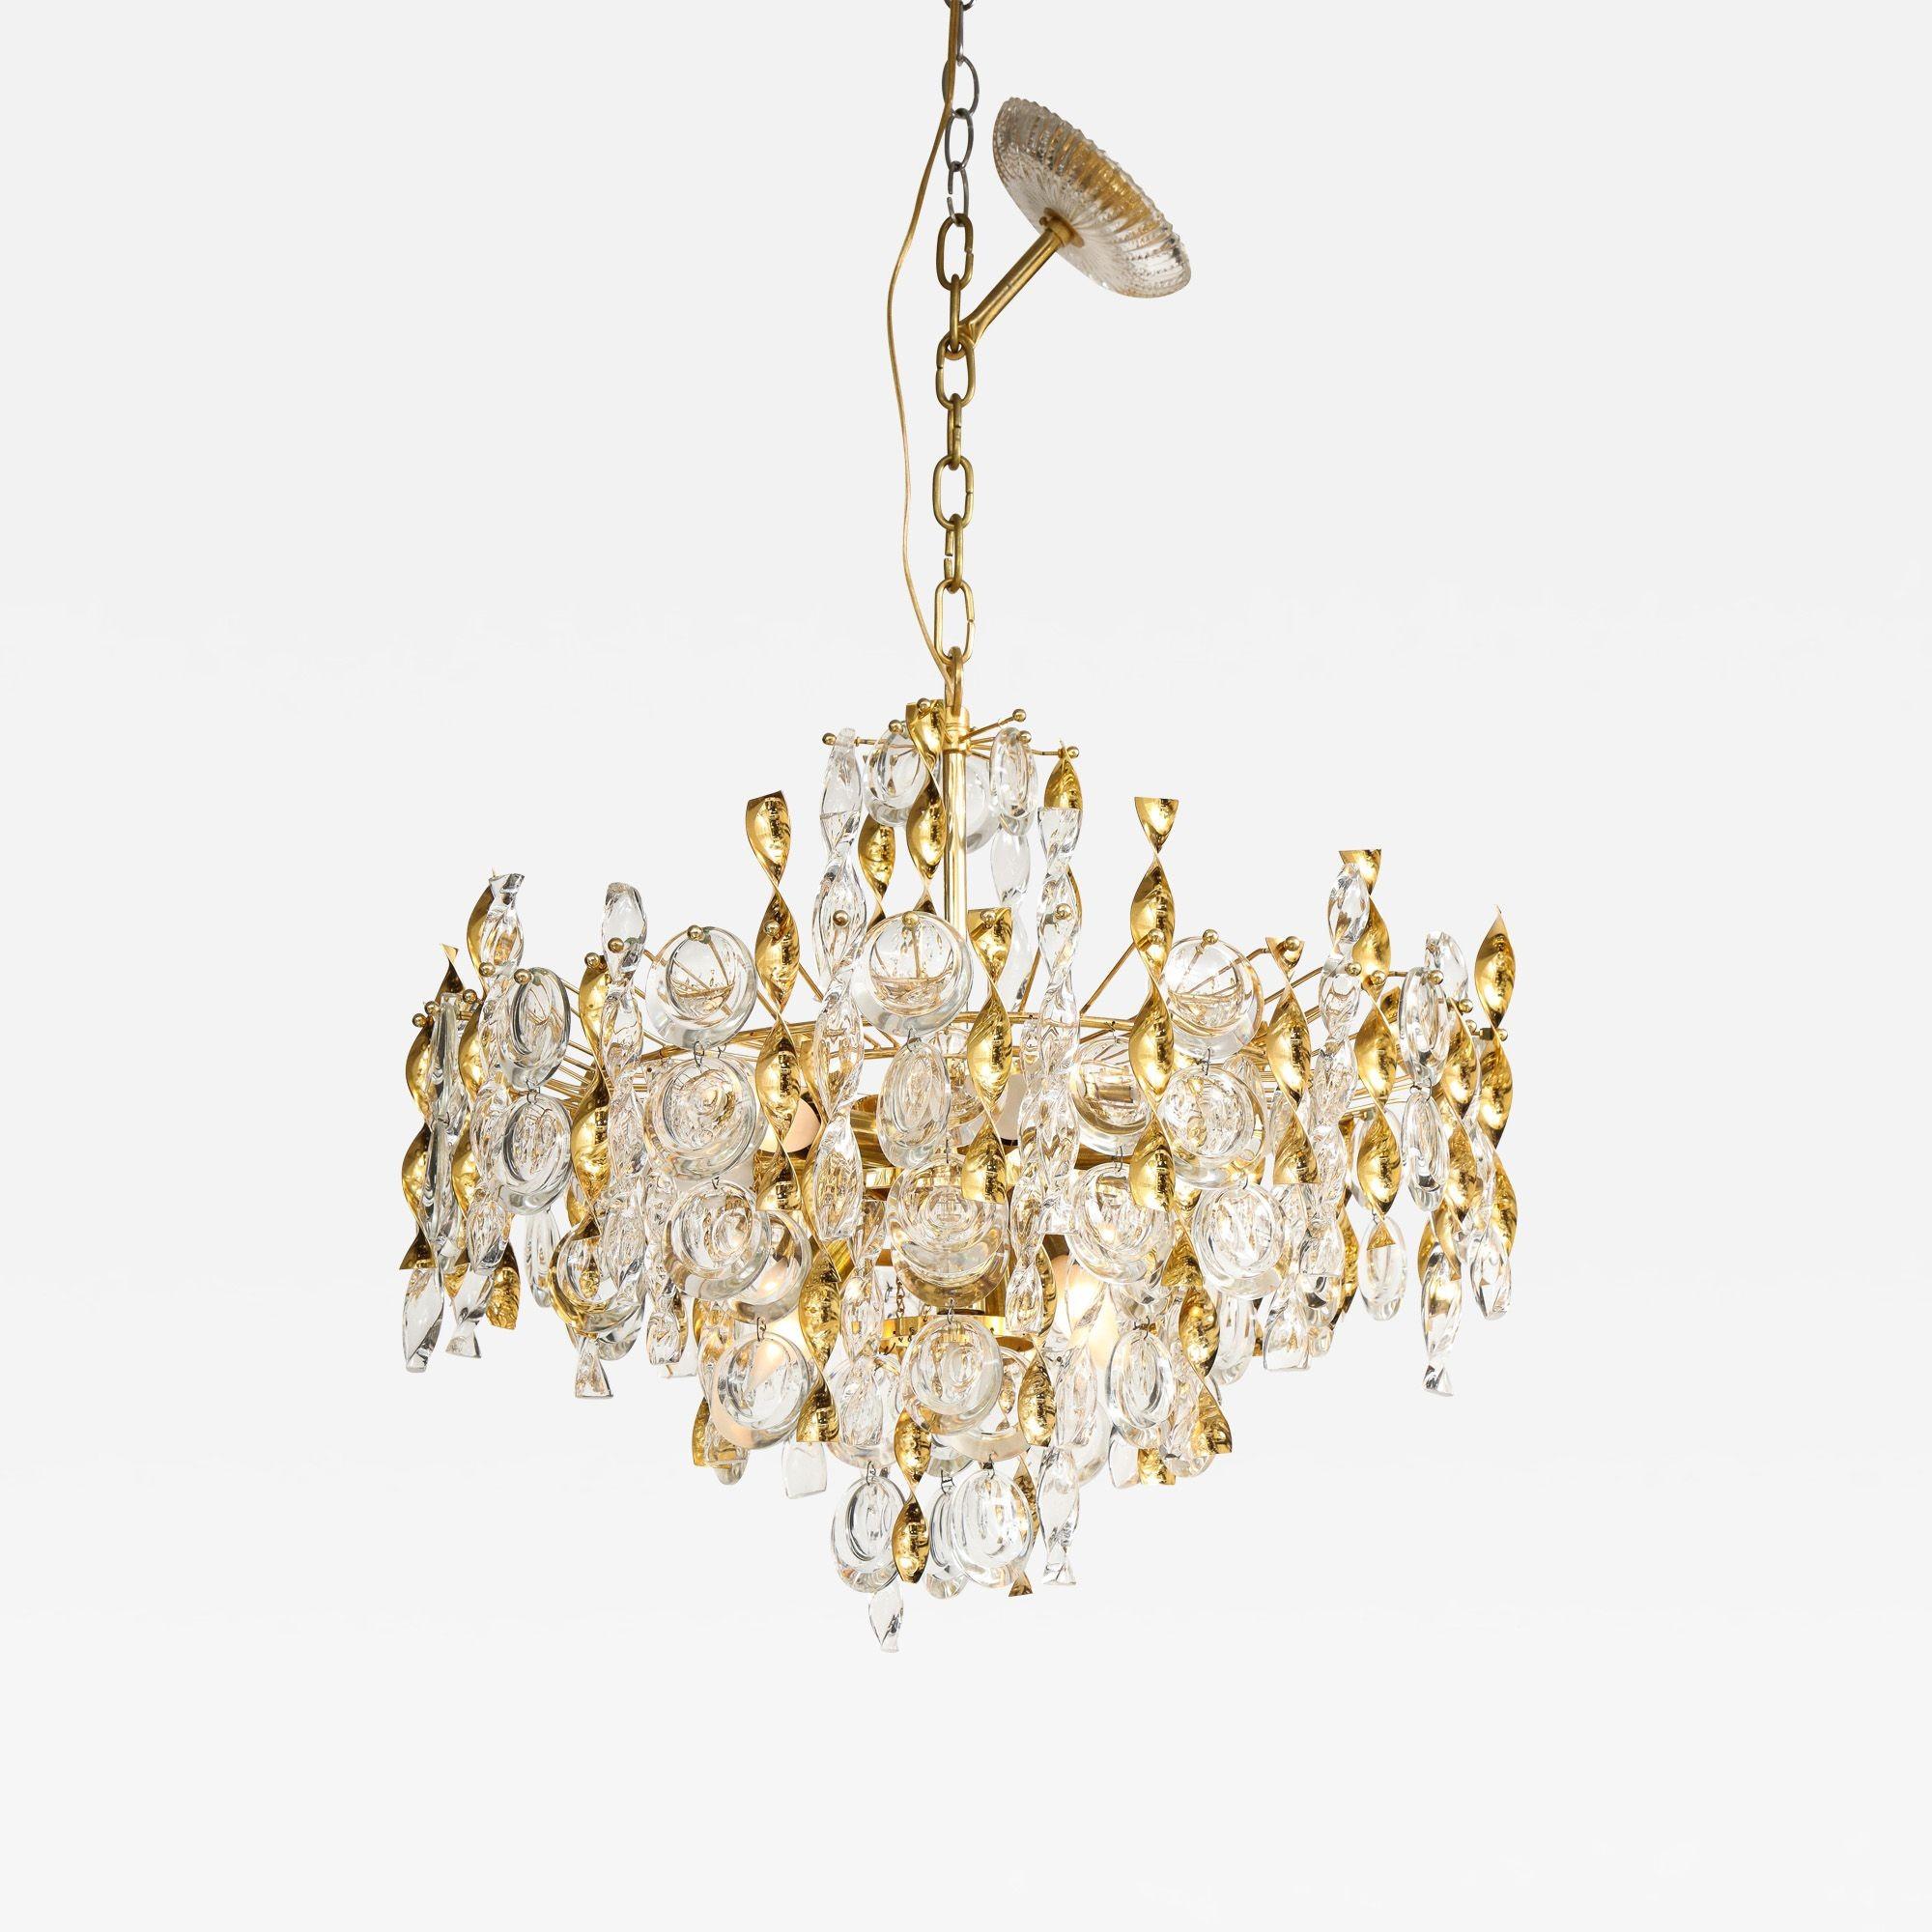 A fabulous jewel-like Gaetano Sciolari pendant chandelier with crystal lens pendants and glass and gold plated brass twists.